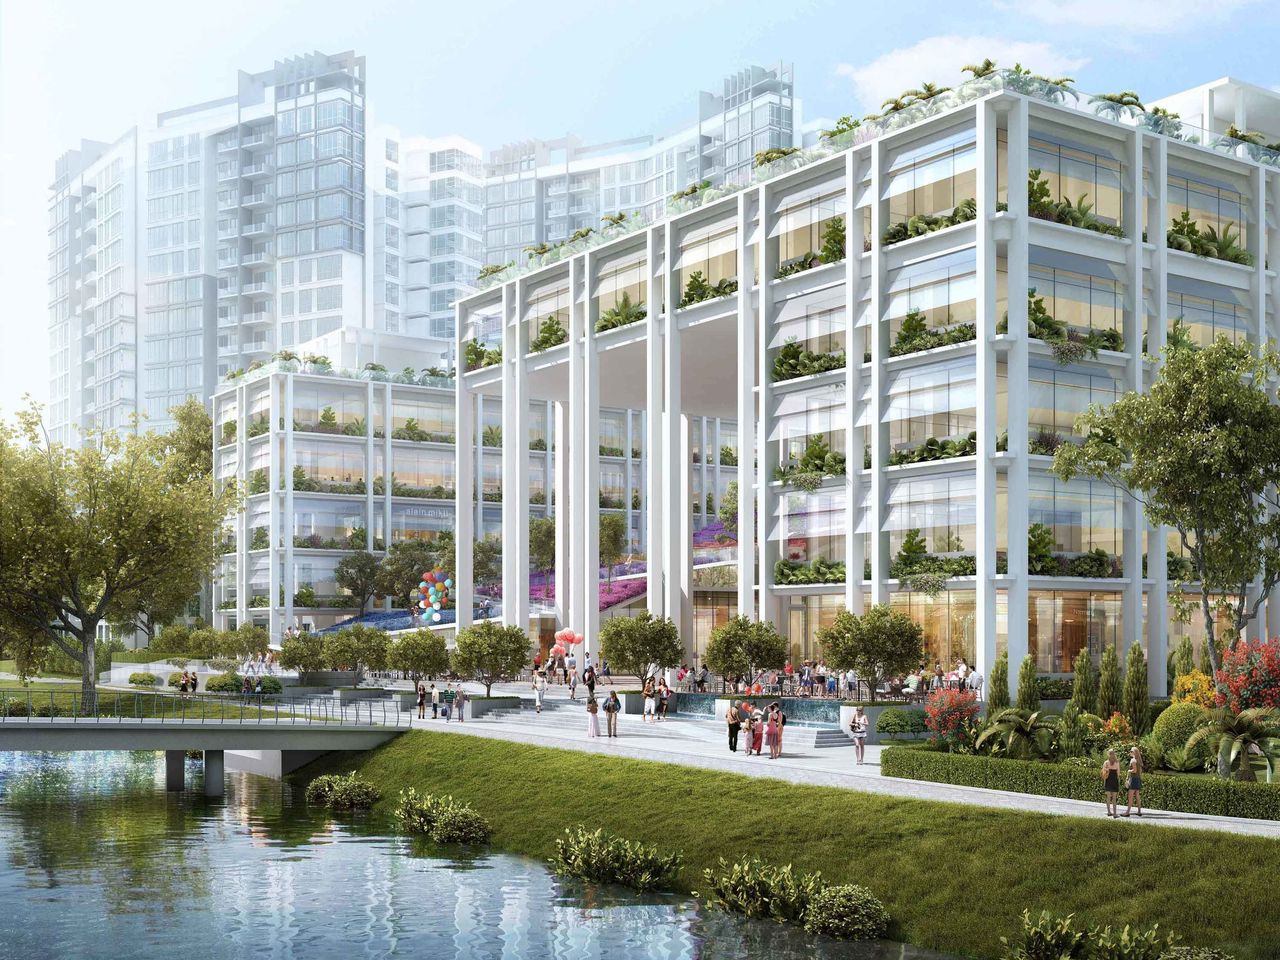 A future Neighbourhood Centre and Polyclinic in Punggol, Singapore, with elevated green spaces.